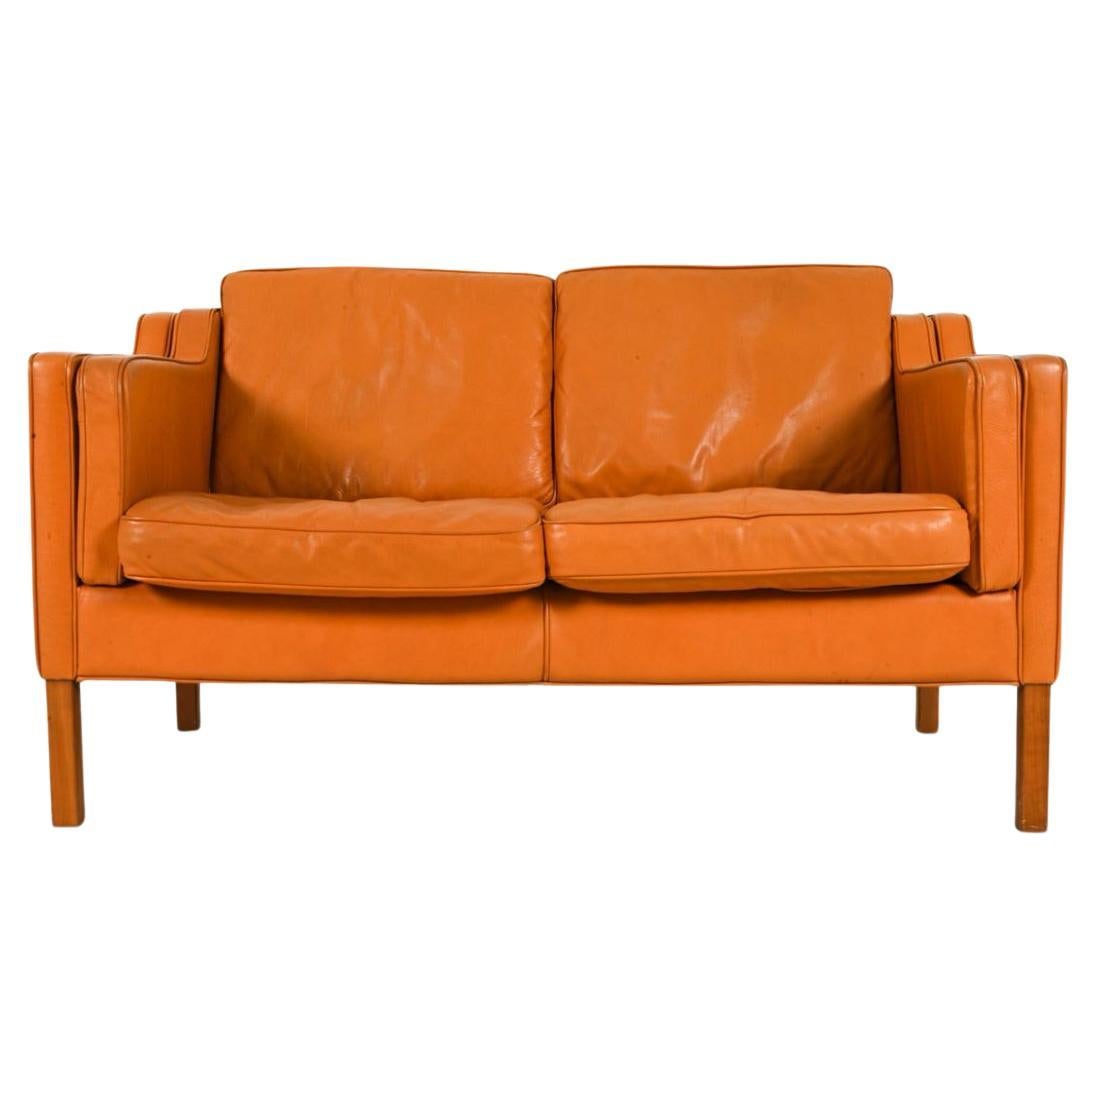 What’s the difference between a settee and a loveseat?